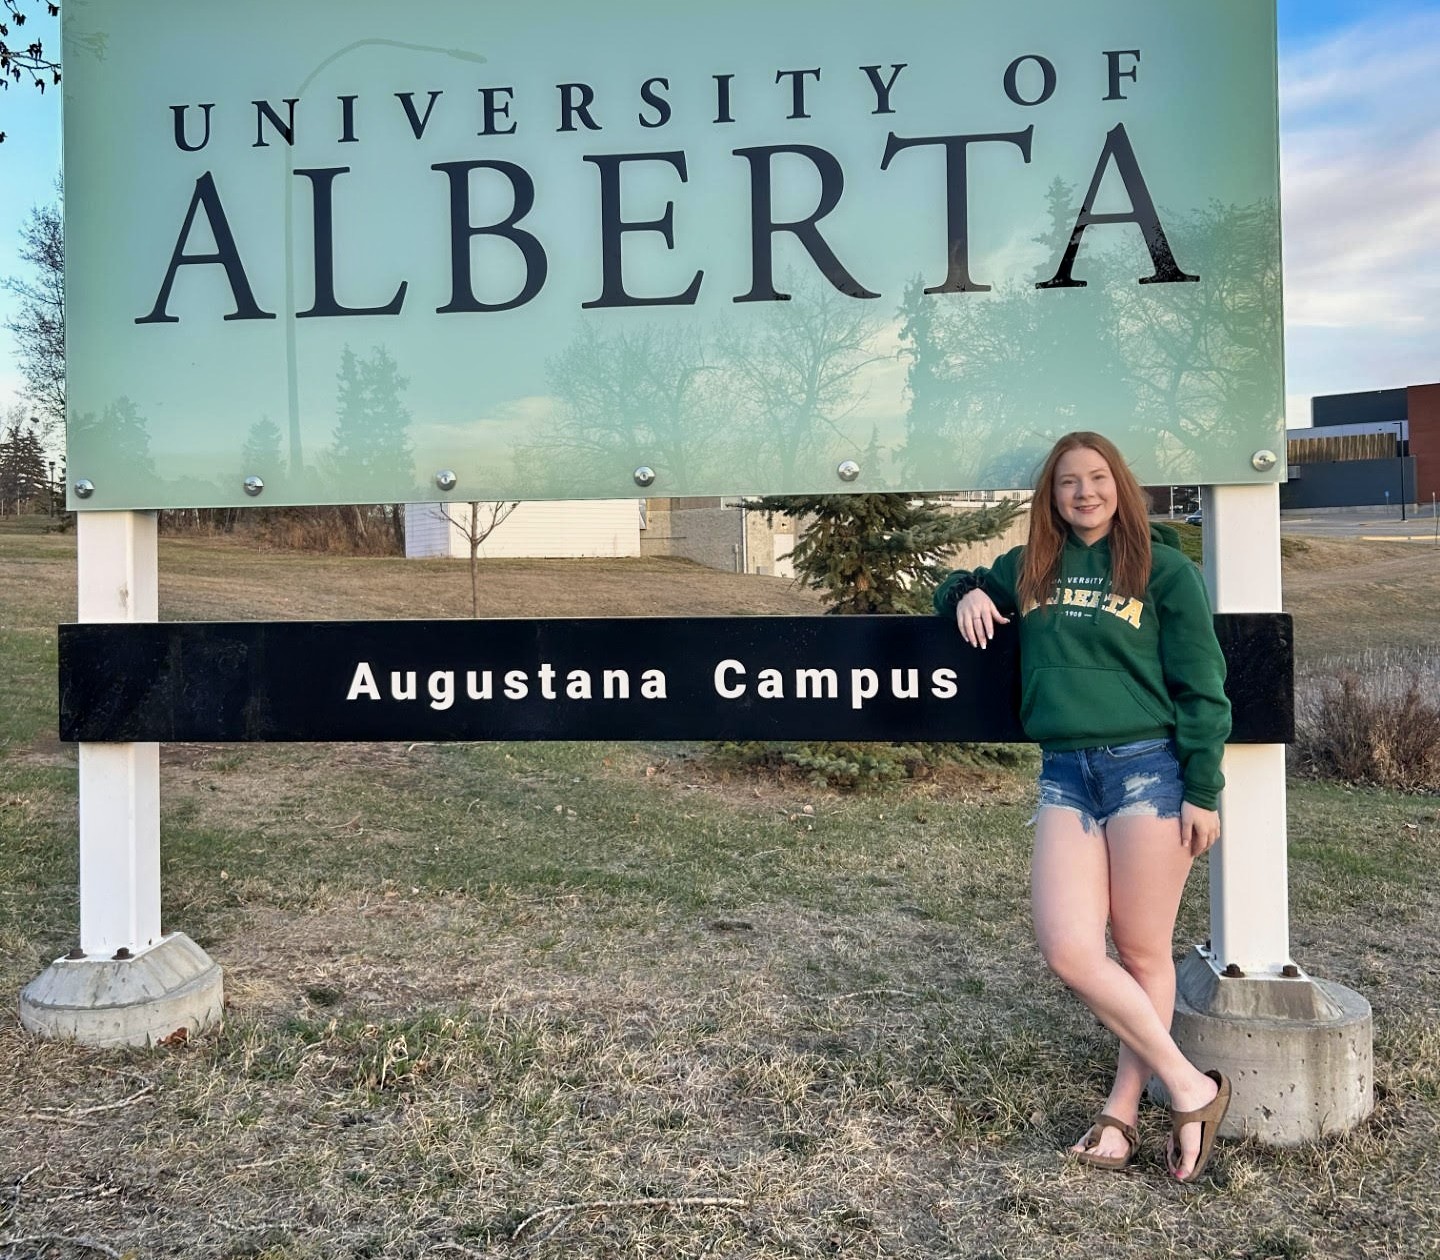 Carly Rombs stands in front of an Augustana Campus sign at the University of Alberta's campus in Camrose.